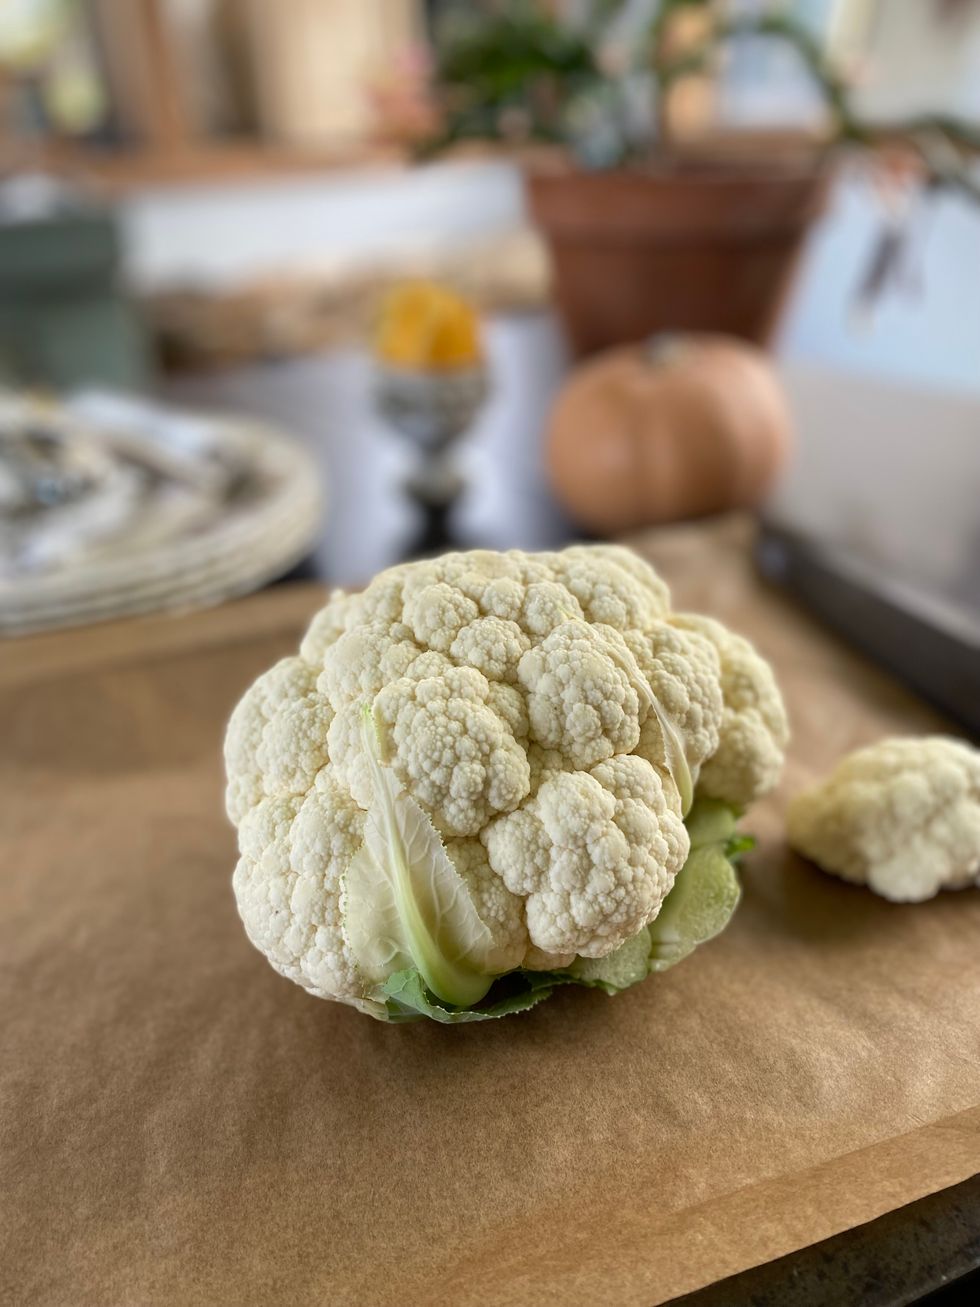 Don’t Panic But … Maybe Cauliflower For Thanksgiving?